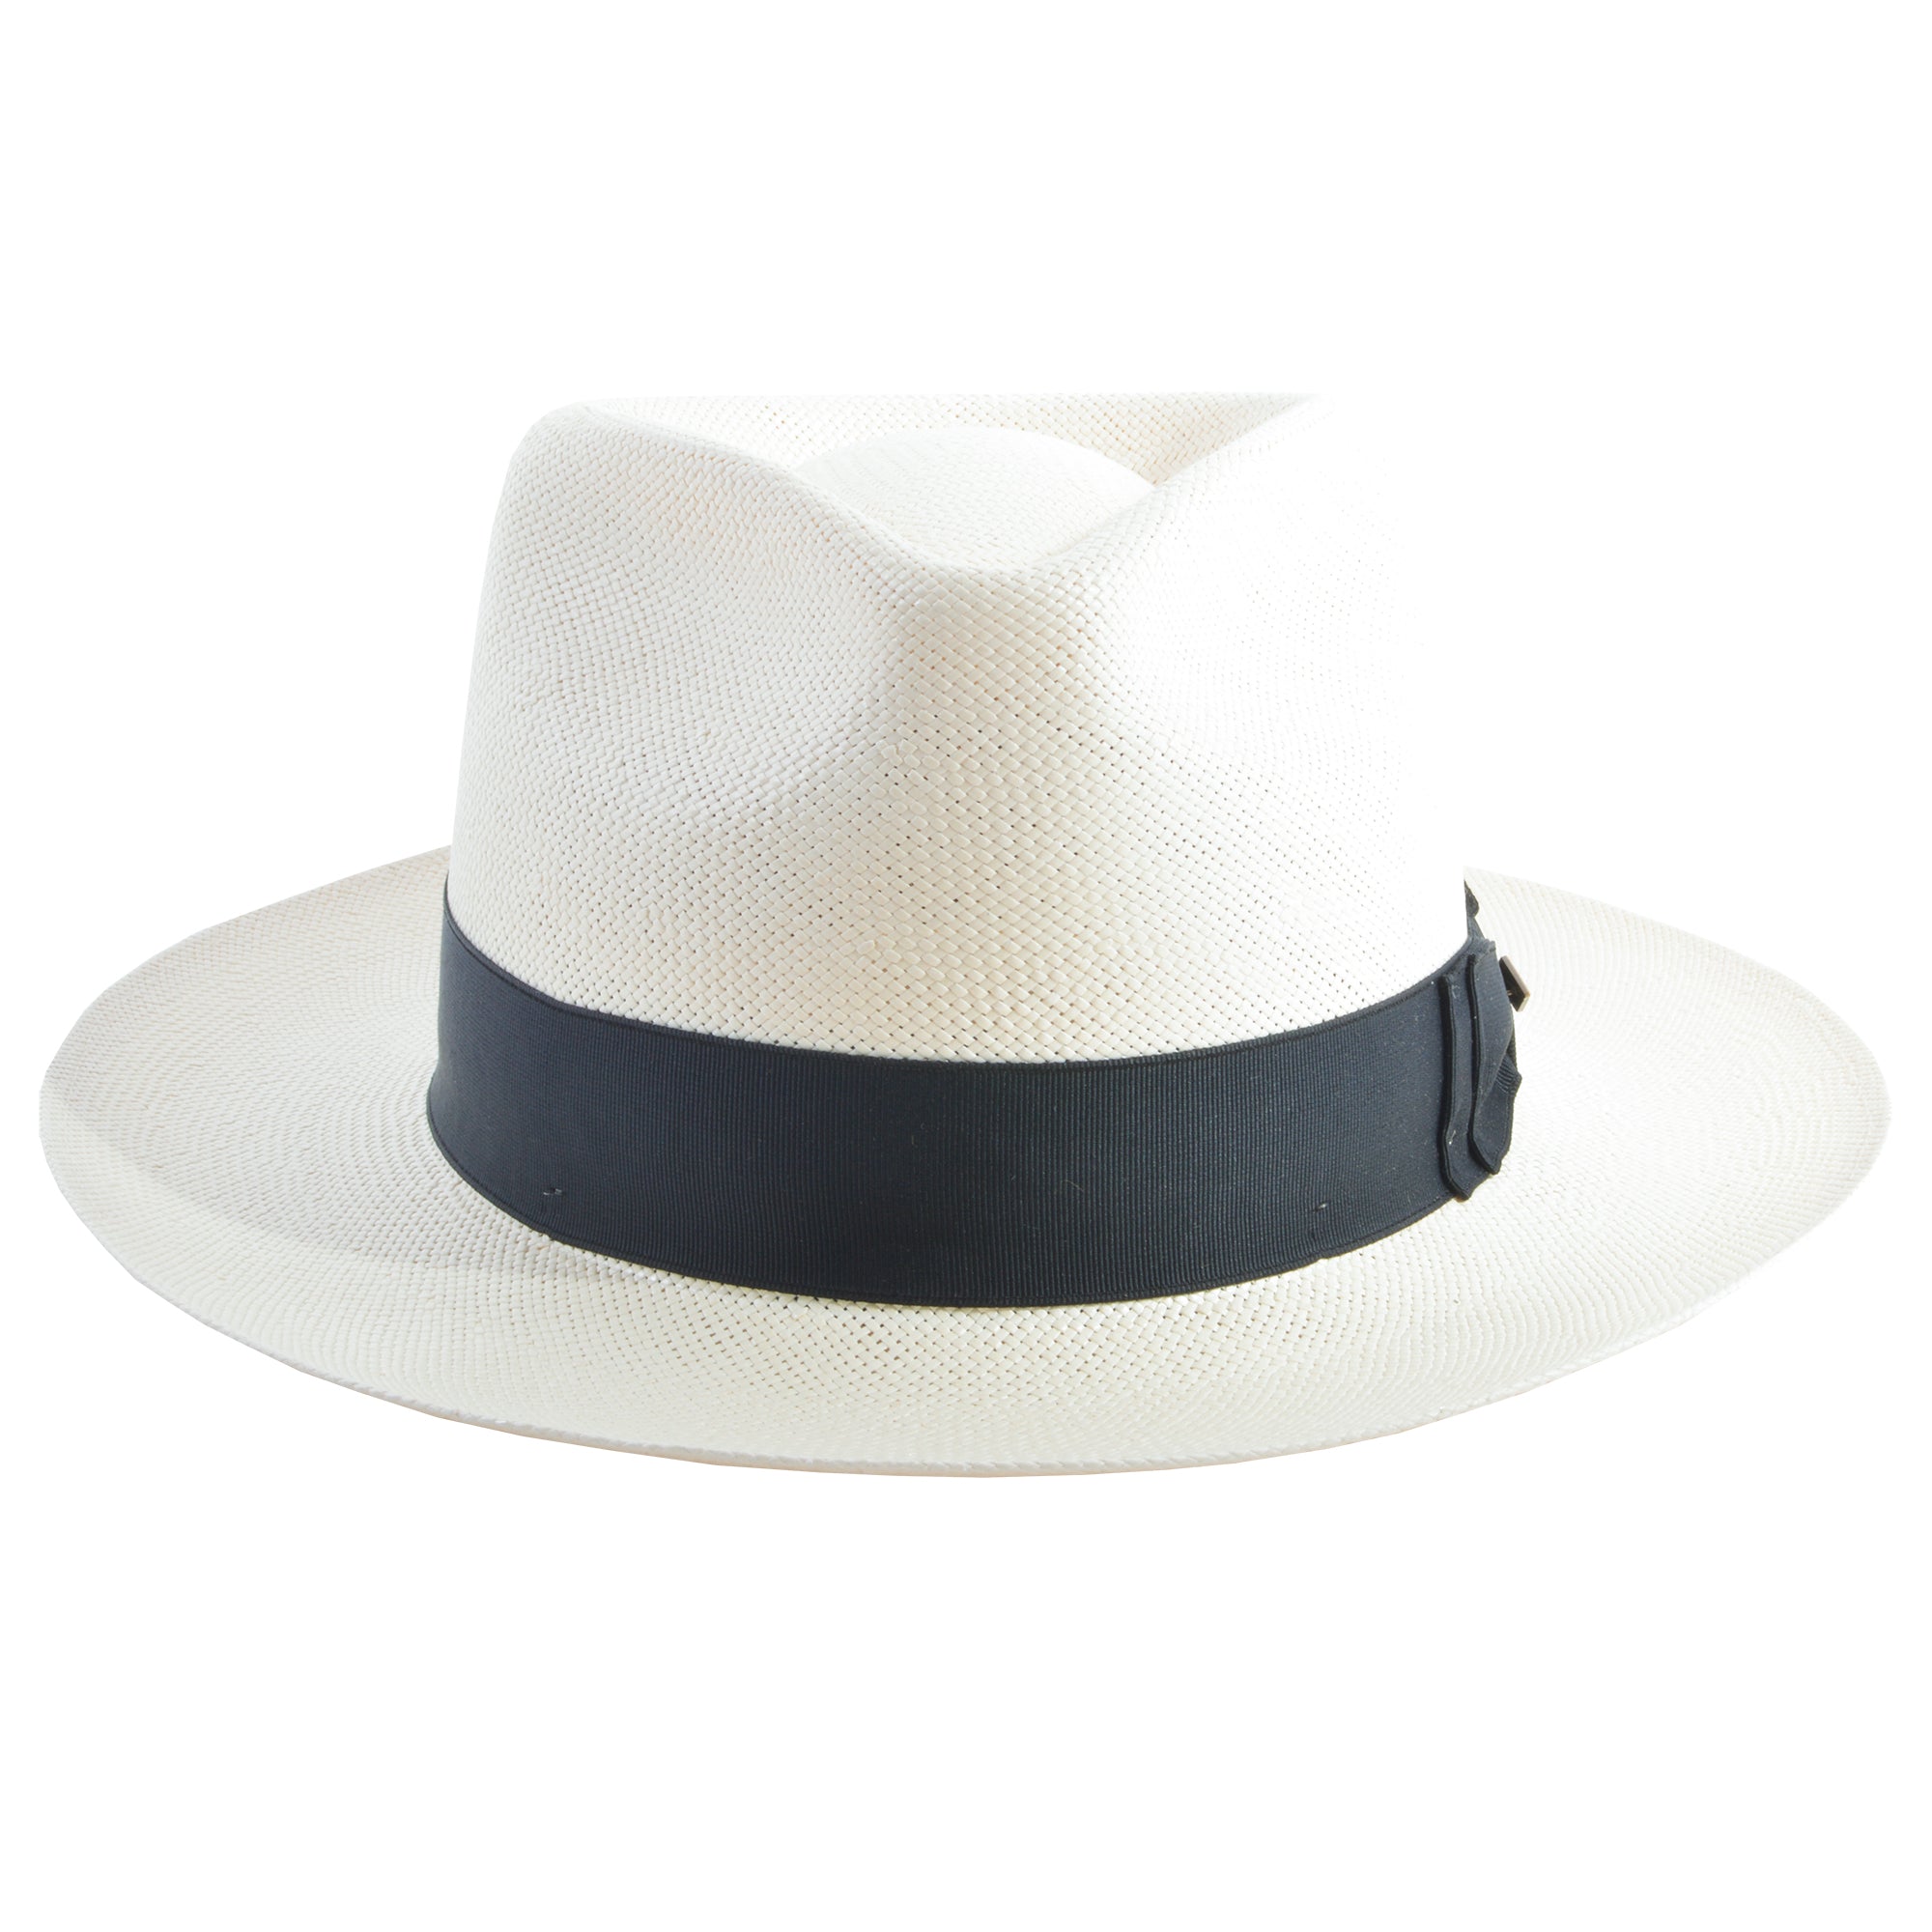 Stetson Ron Donegan Shantung Straw Hat with Hat Box - 0